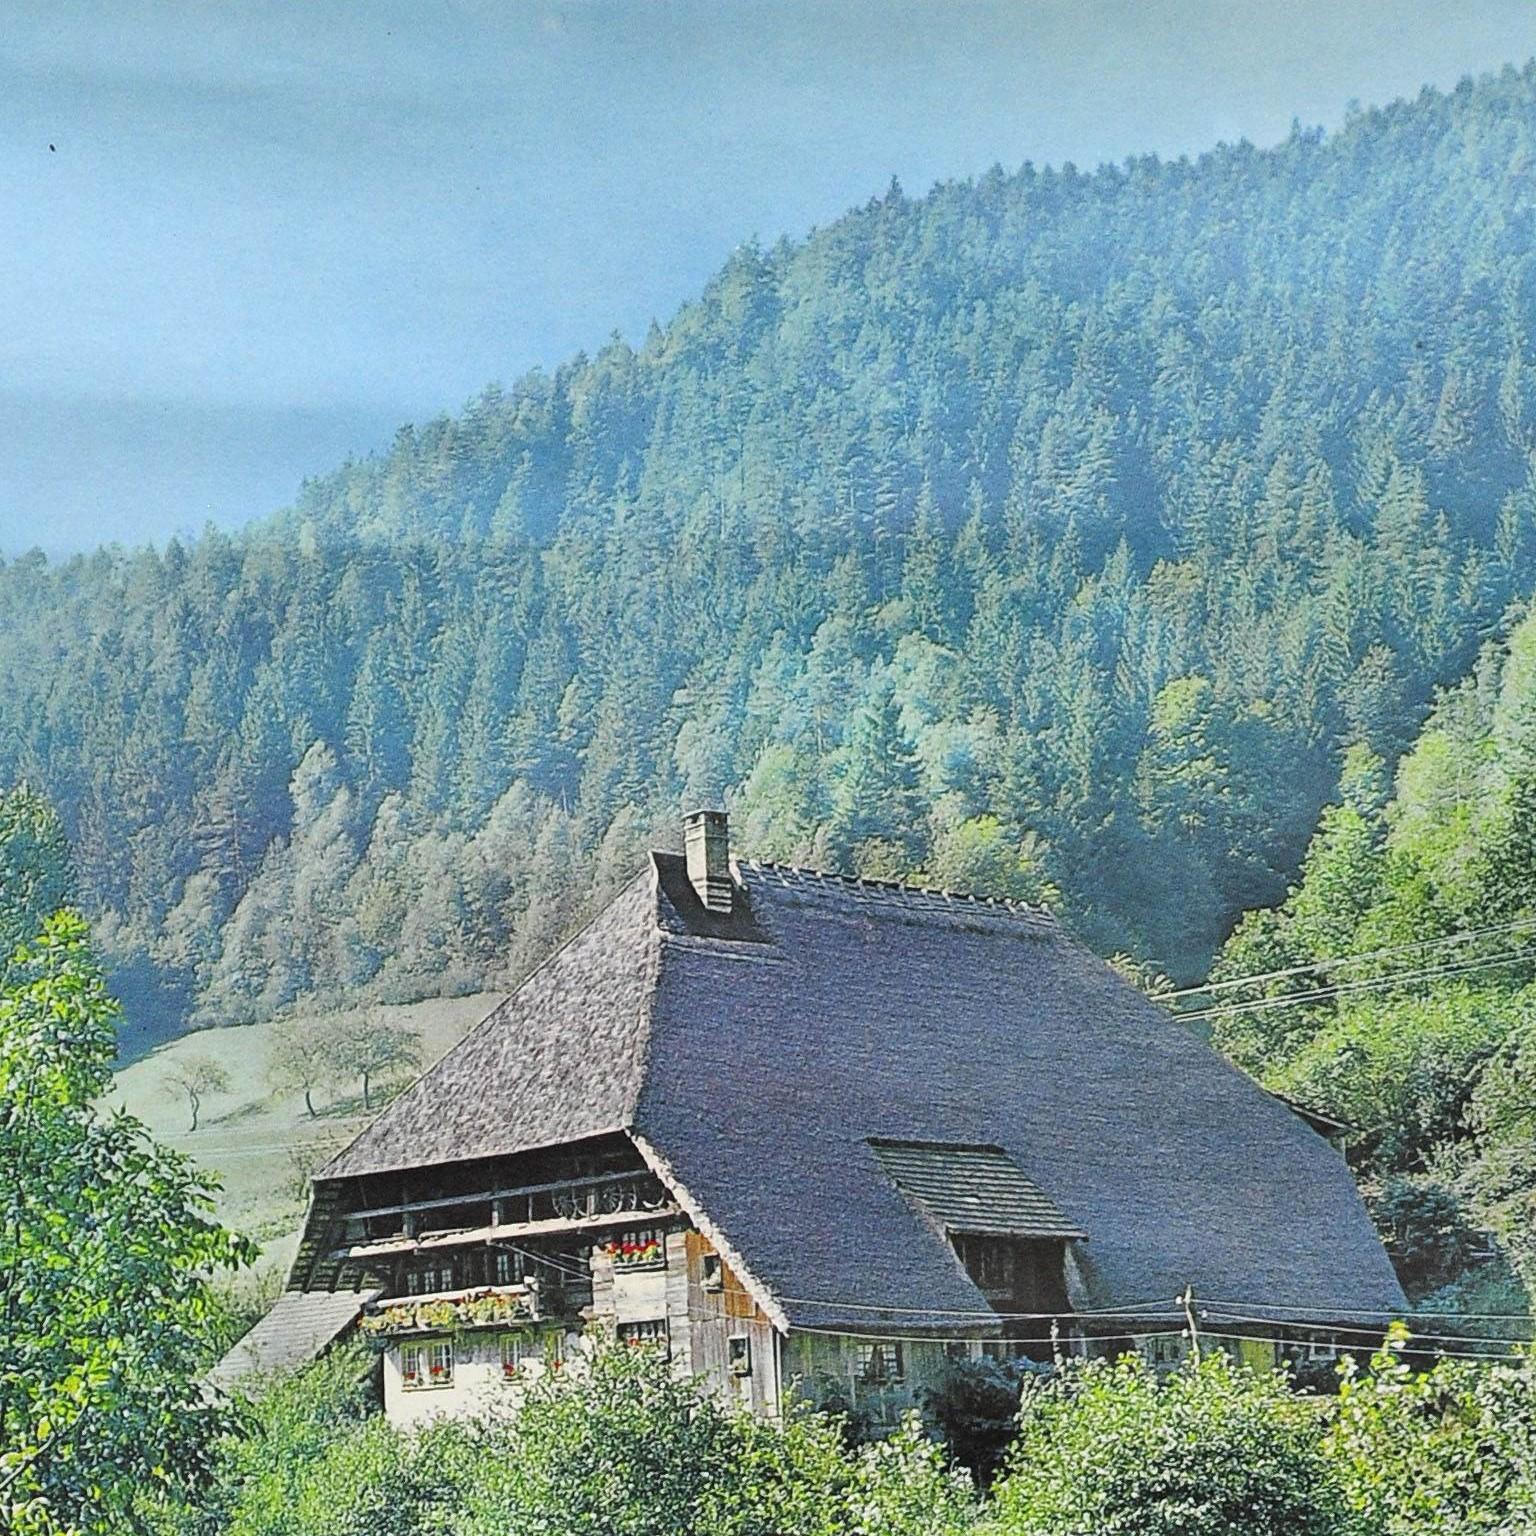 A vintage pull-down wall chart depicting a Black Forest house in the valley of Gutach near Hornberg, Germany. Photo: H. Müller-Brunke, Chiemgau. Used as teaching material in German schools. Published by Westermann, Braunschweig. Colorful print on